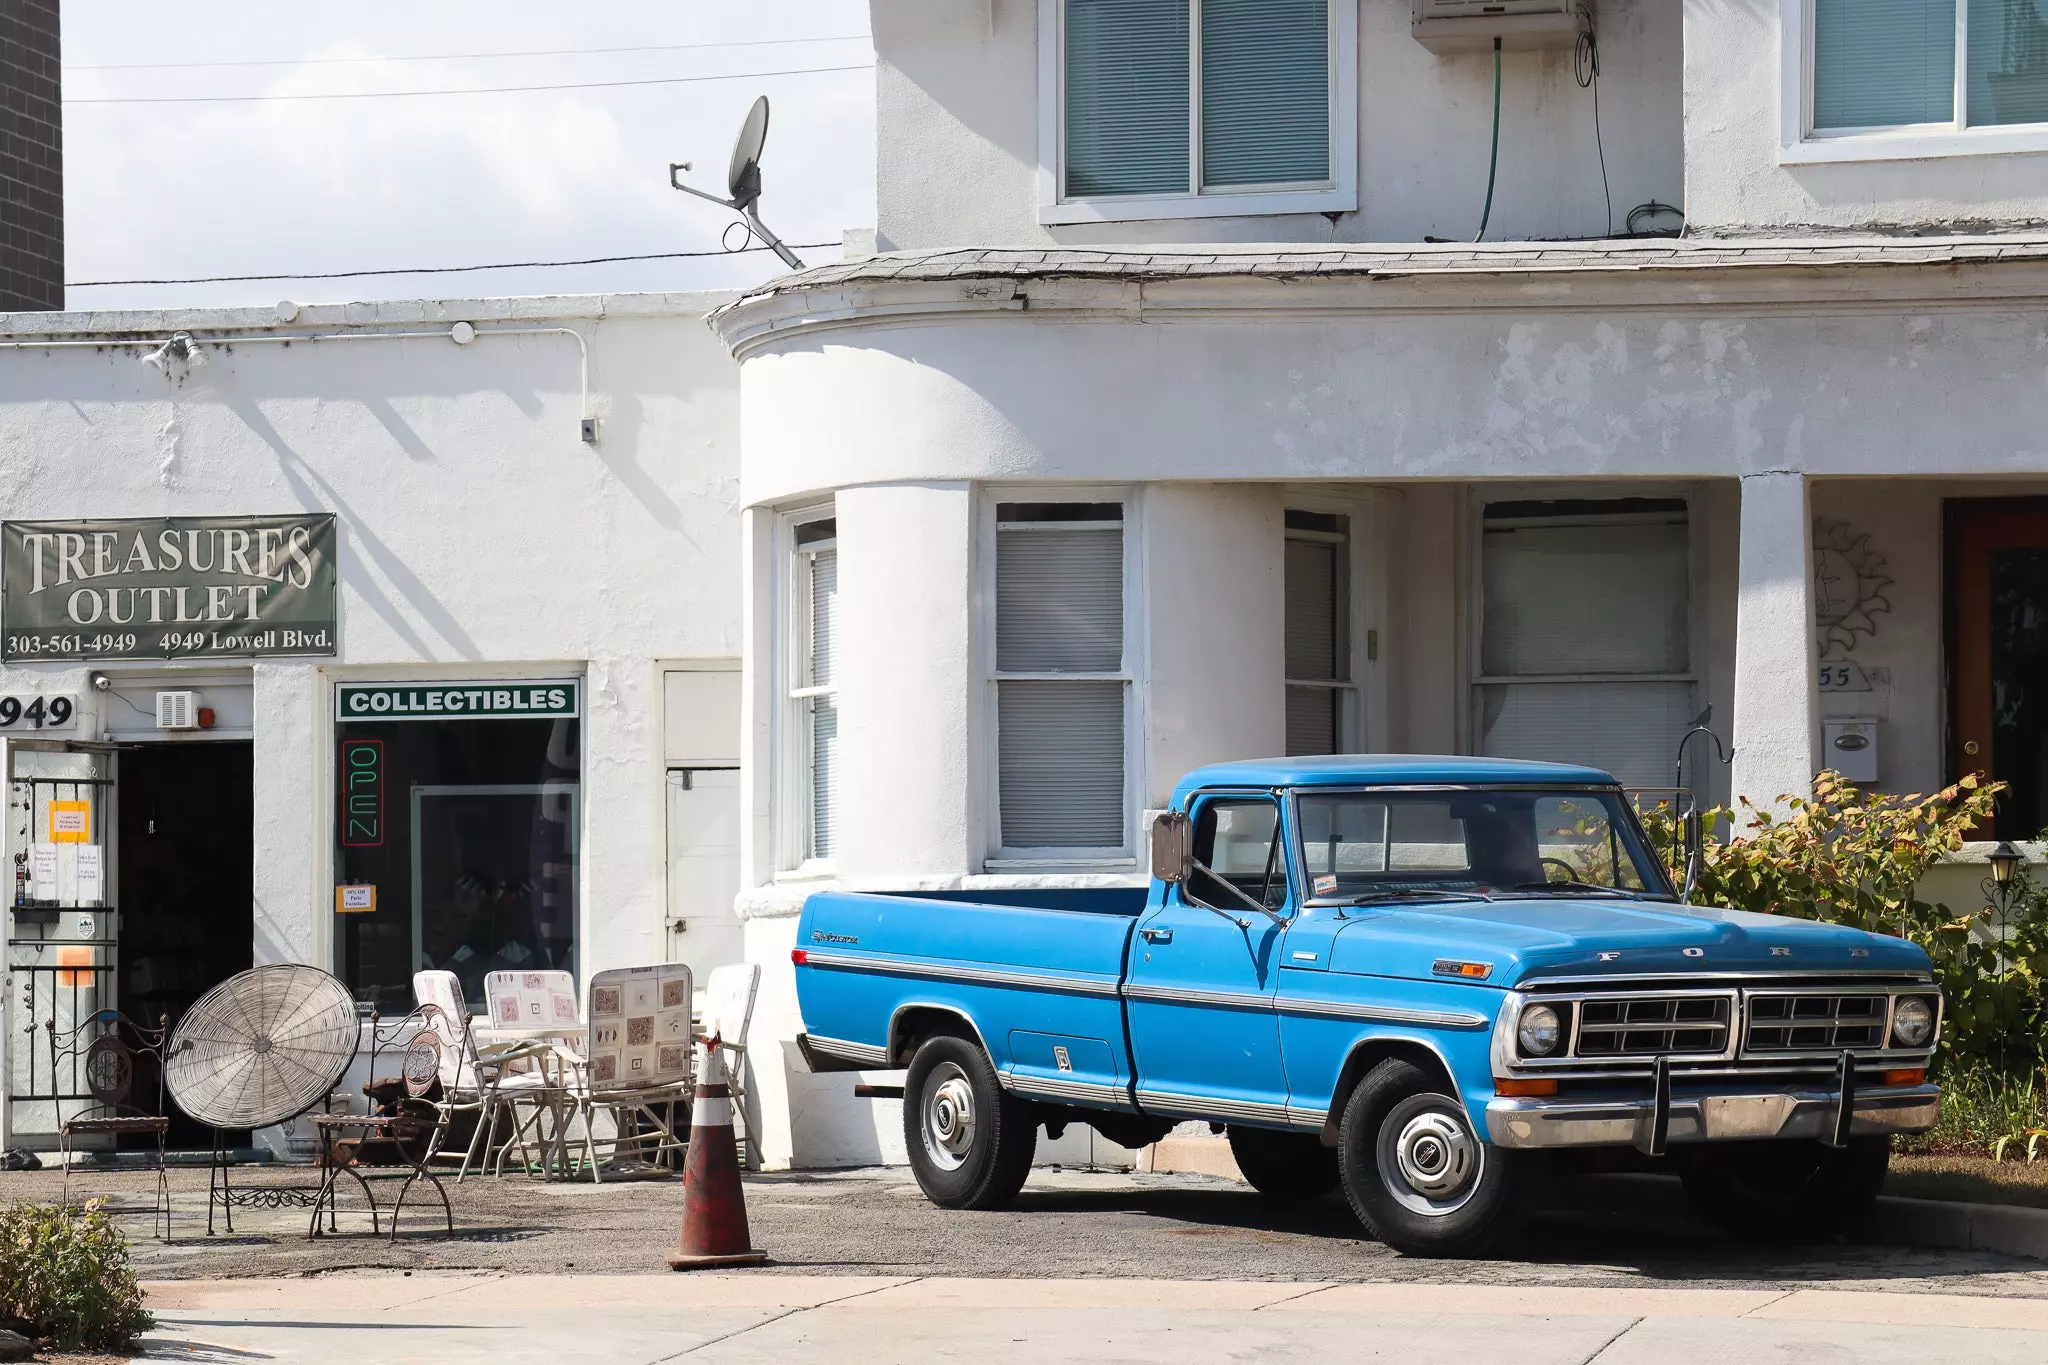 Can You Think of a Better Vehicle Parked Next to an Antique Store?